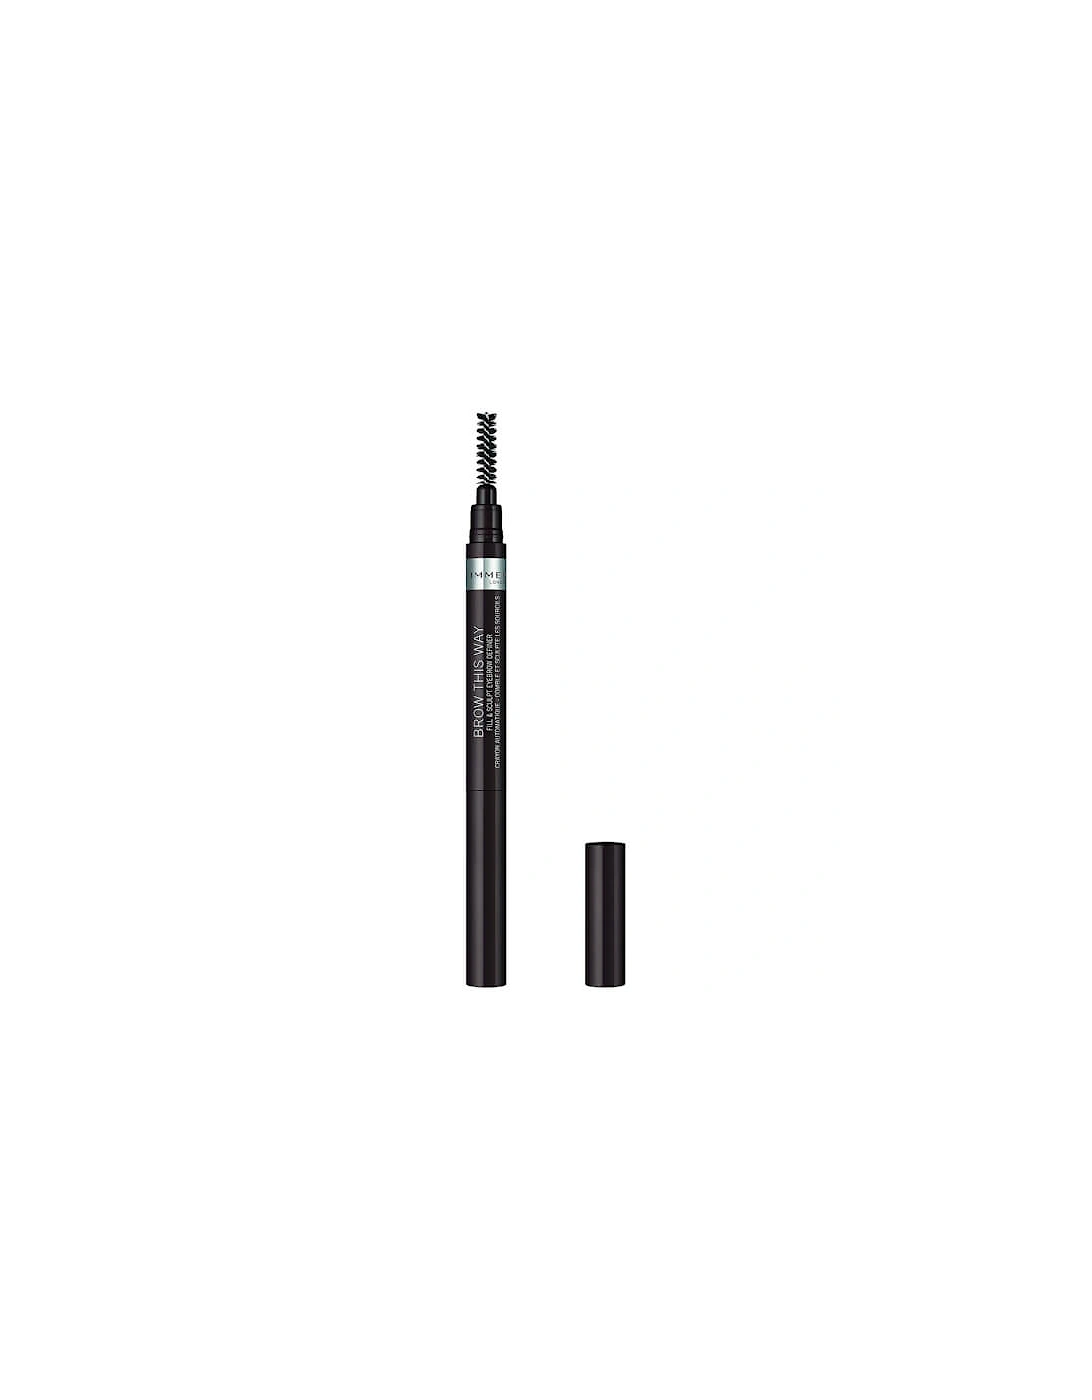 Brow This Way Fill and Sculpt Eyebrow Definer 0.4g - Dark Brown, 2 of 1